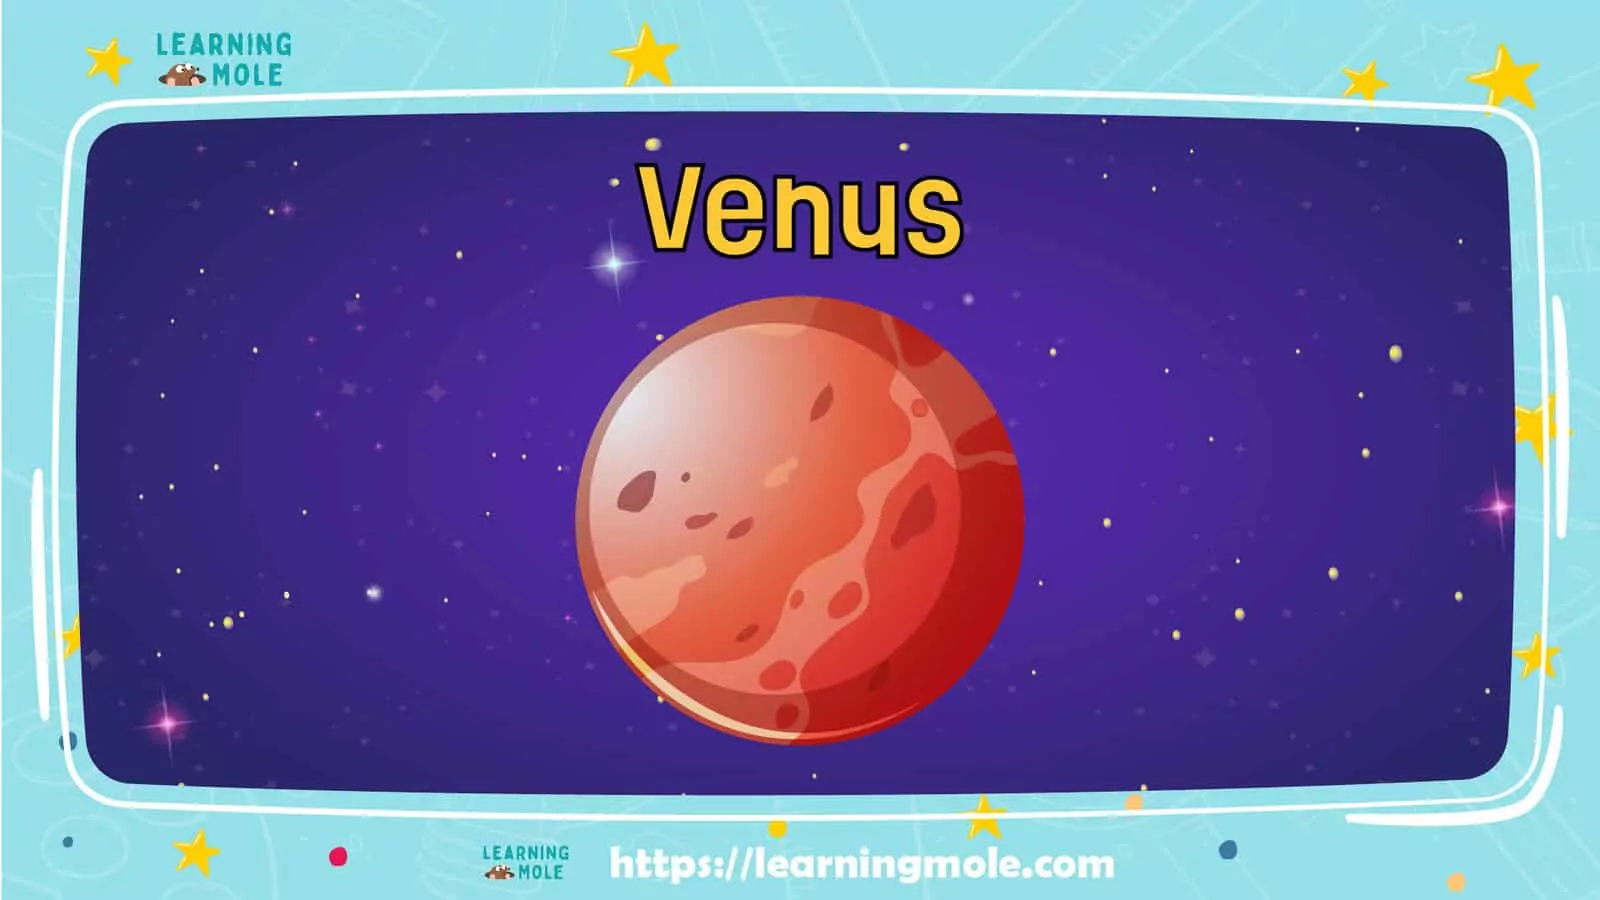 Facts about the Solar System, Lots of Planet Facts for Kids